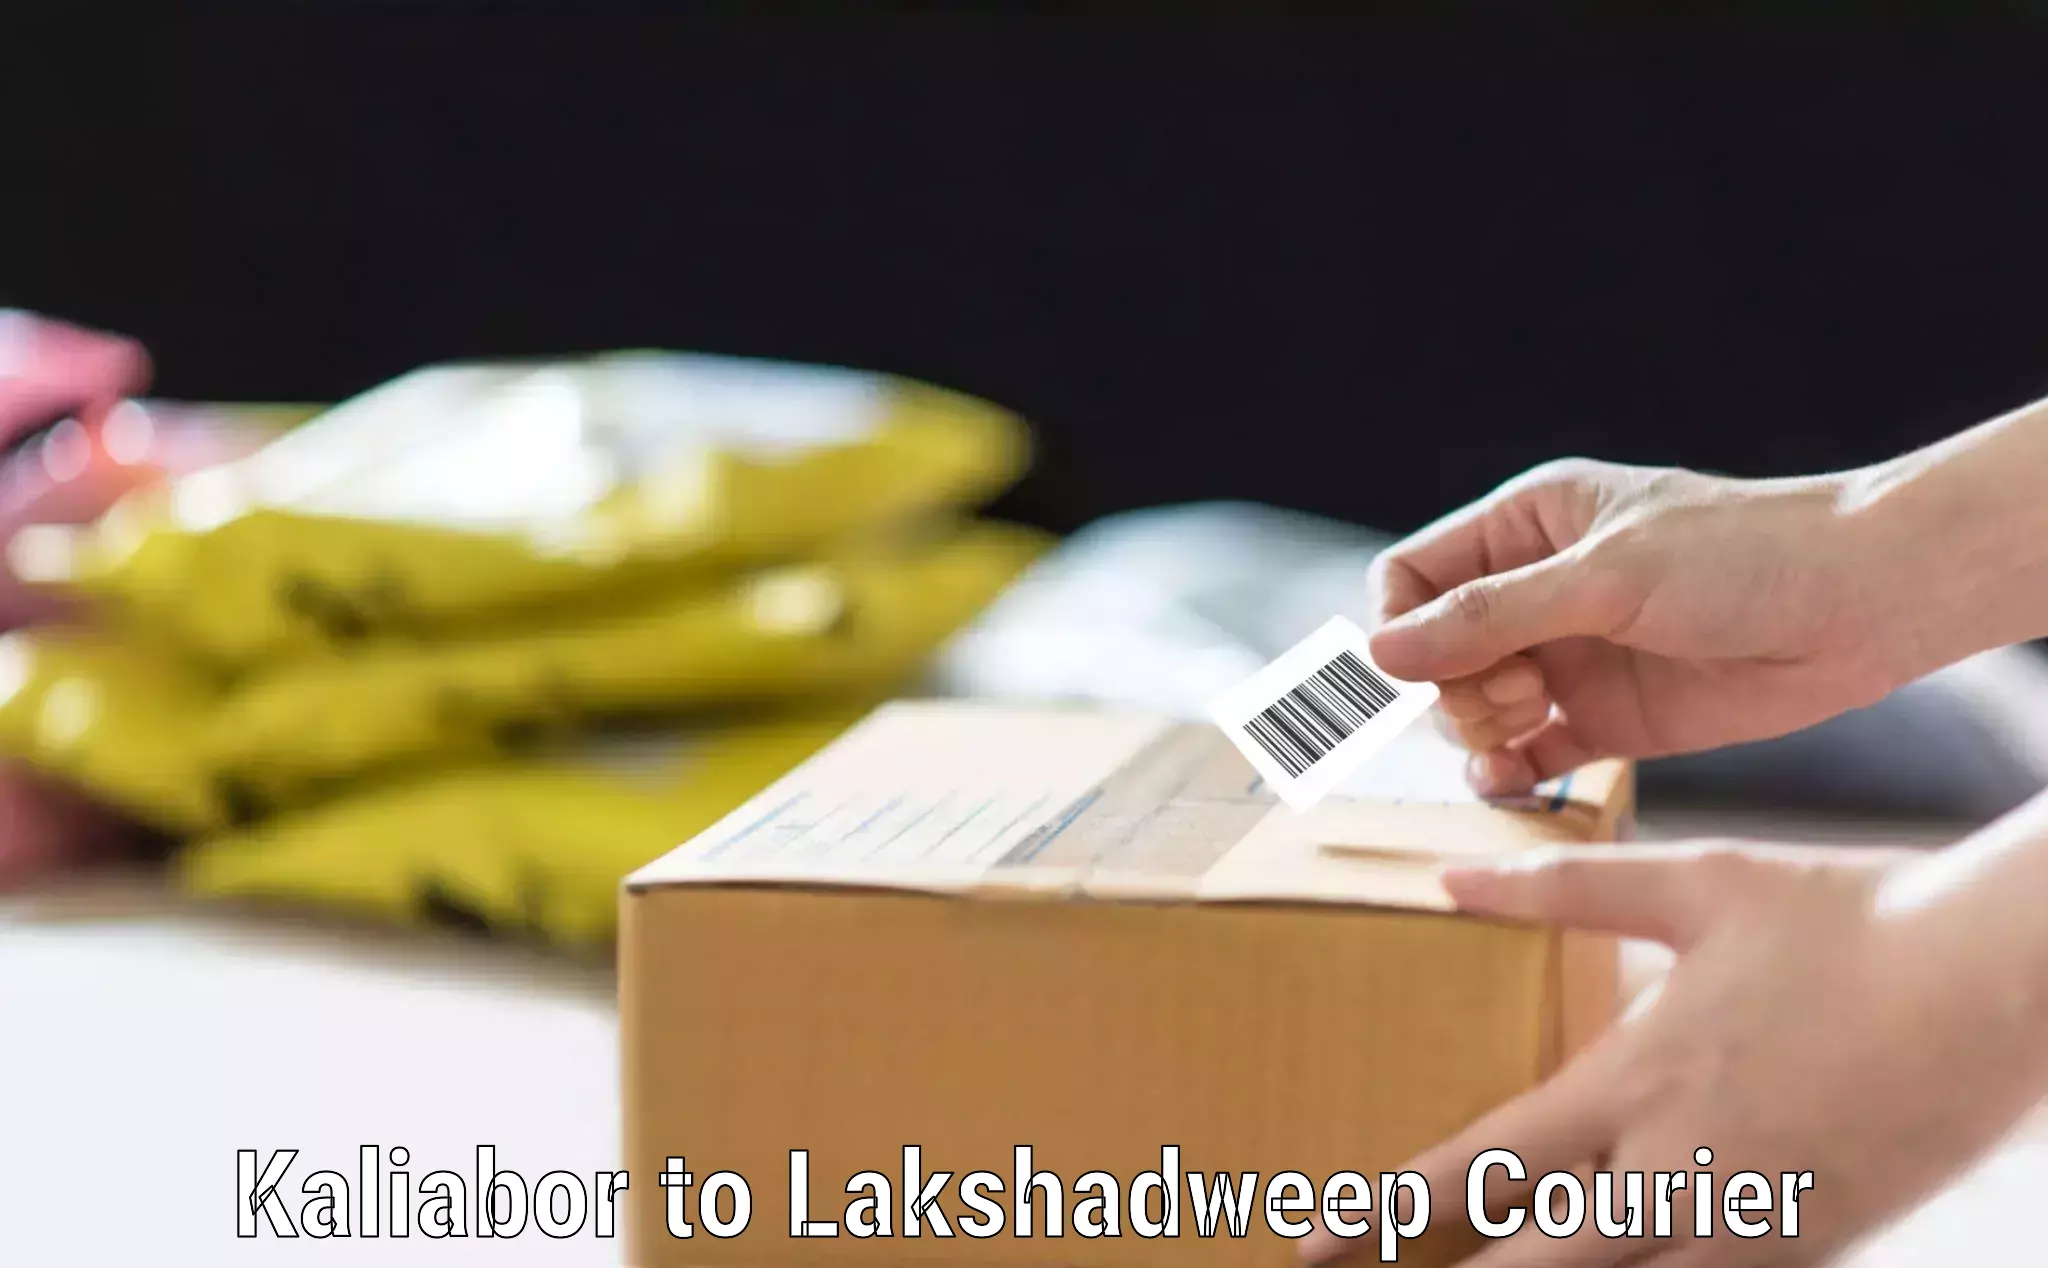 Baggage relocation service Kaliabor to Lakshadweep